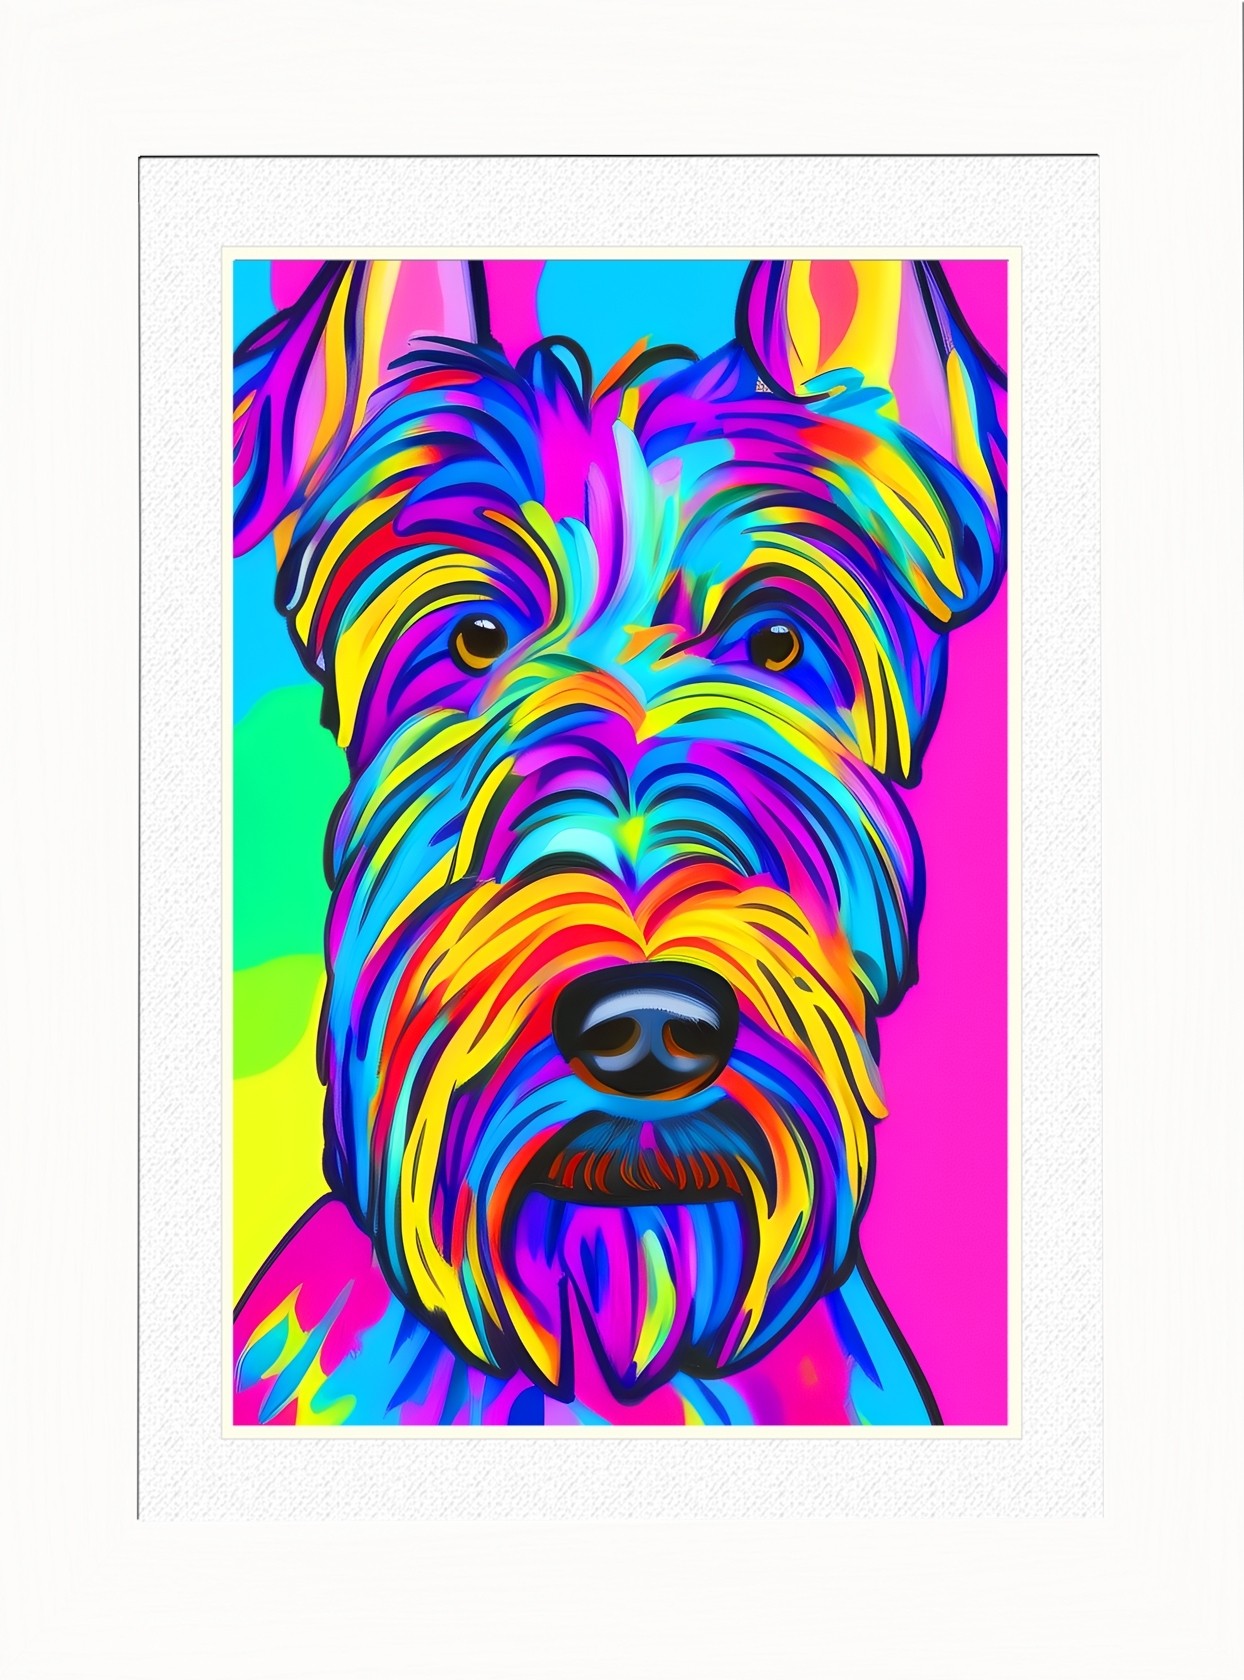 Scottish Terrier Dog Picture Framed Colourful Abstract Art (A4 White Frame)